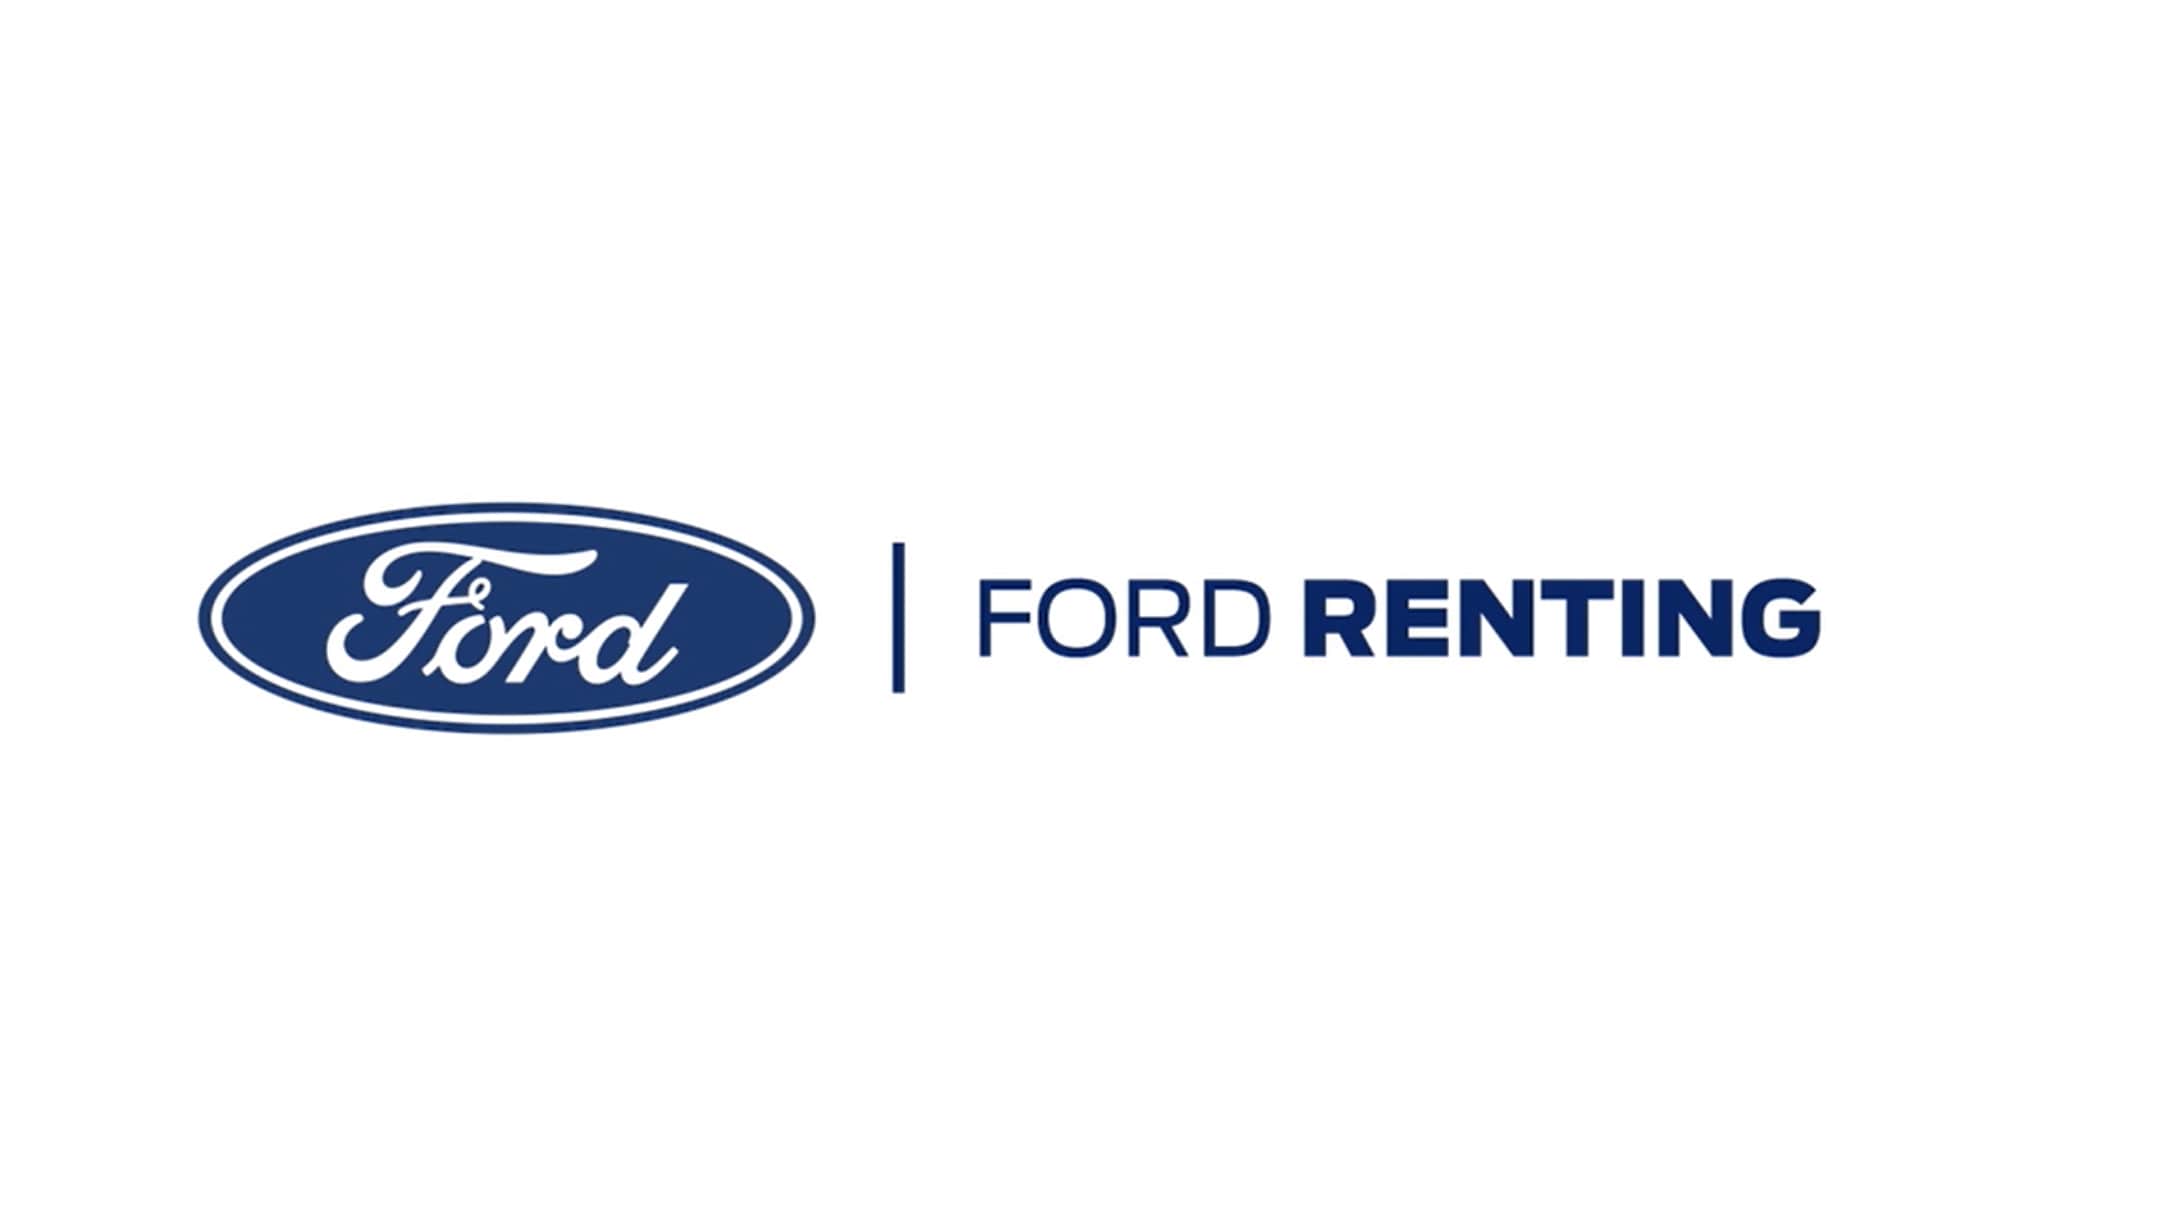 Ford Renting